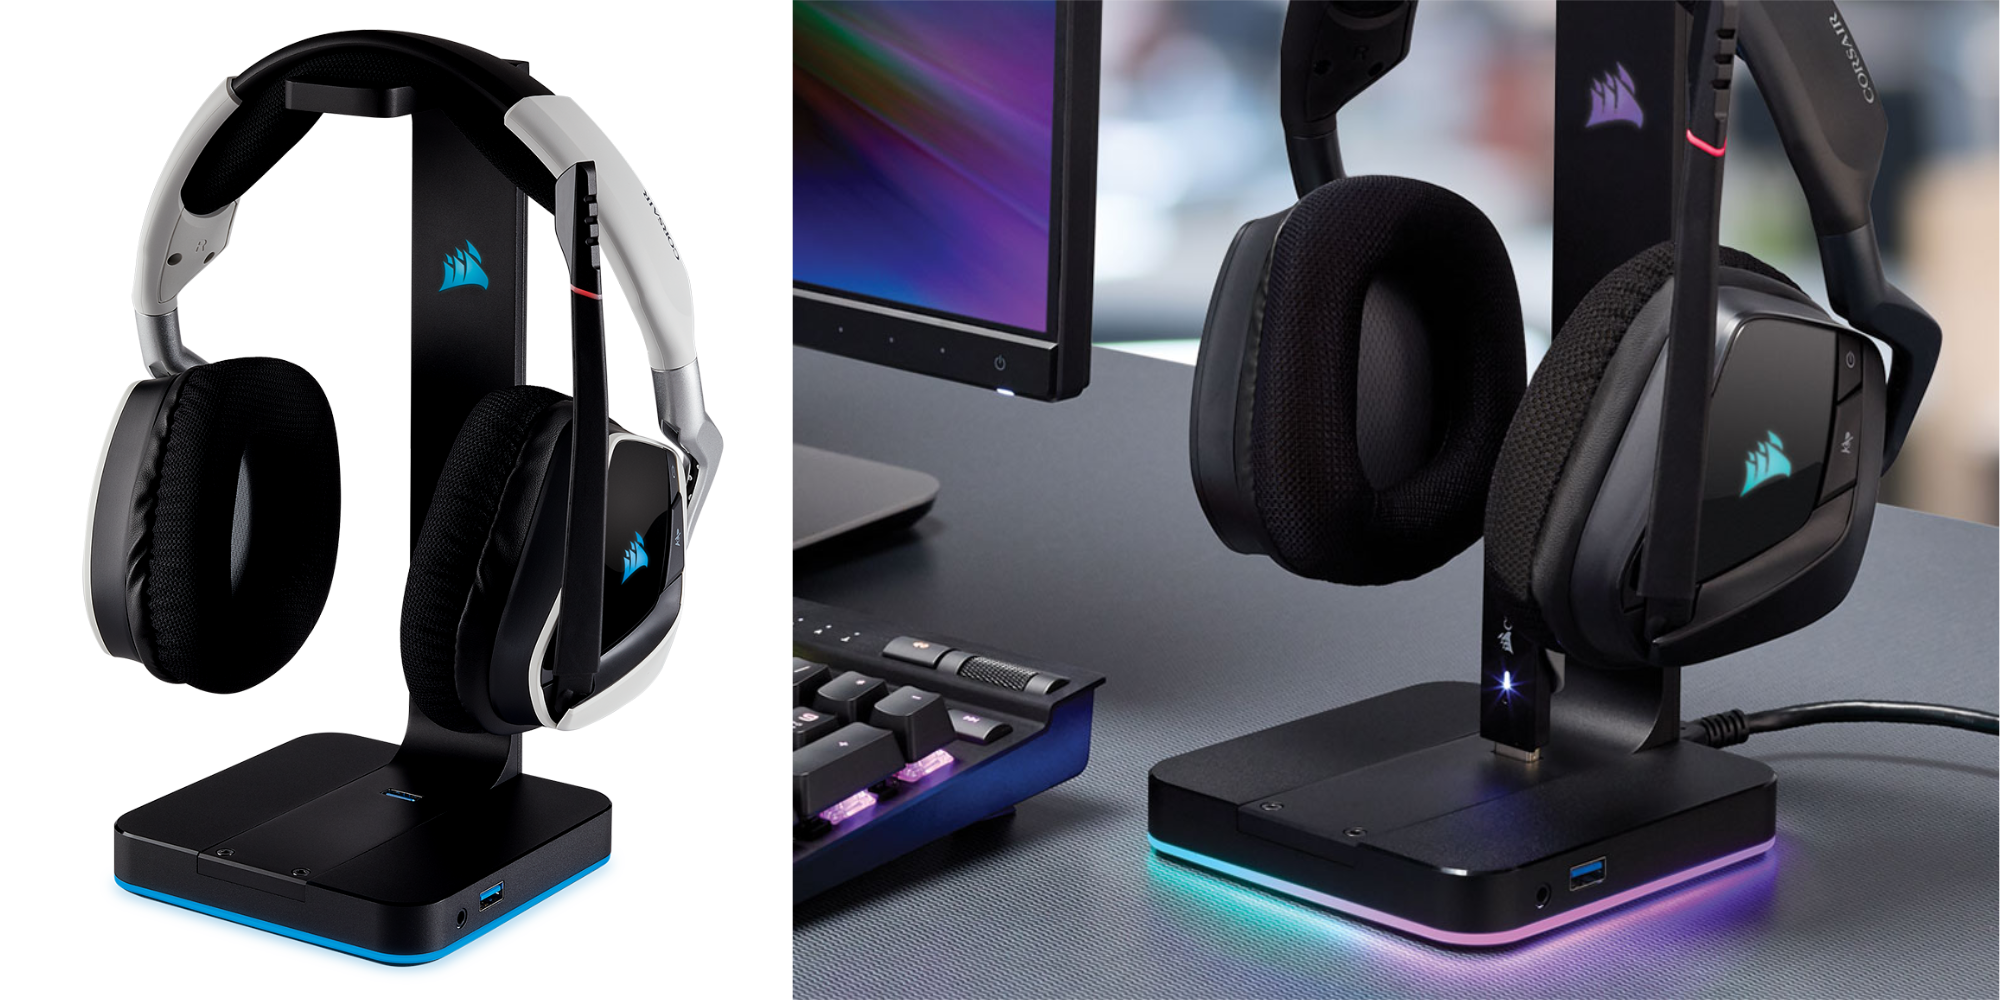 Add CORSAIR's RGB Premium Headset Stand to your desk for $49 more from $35